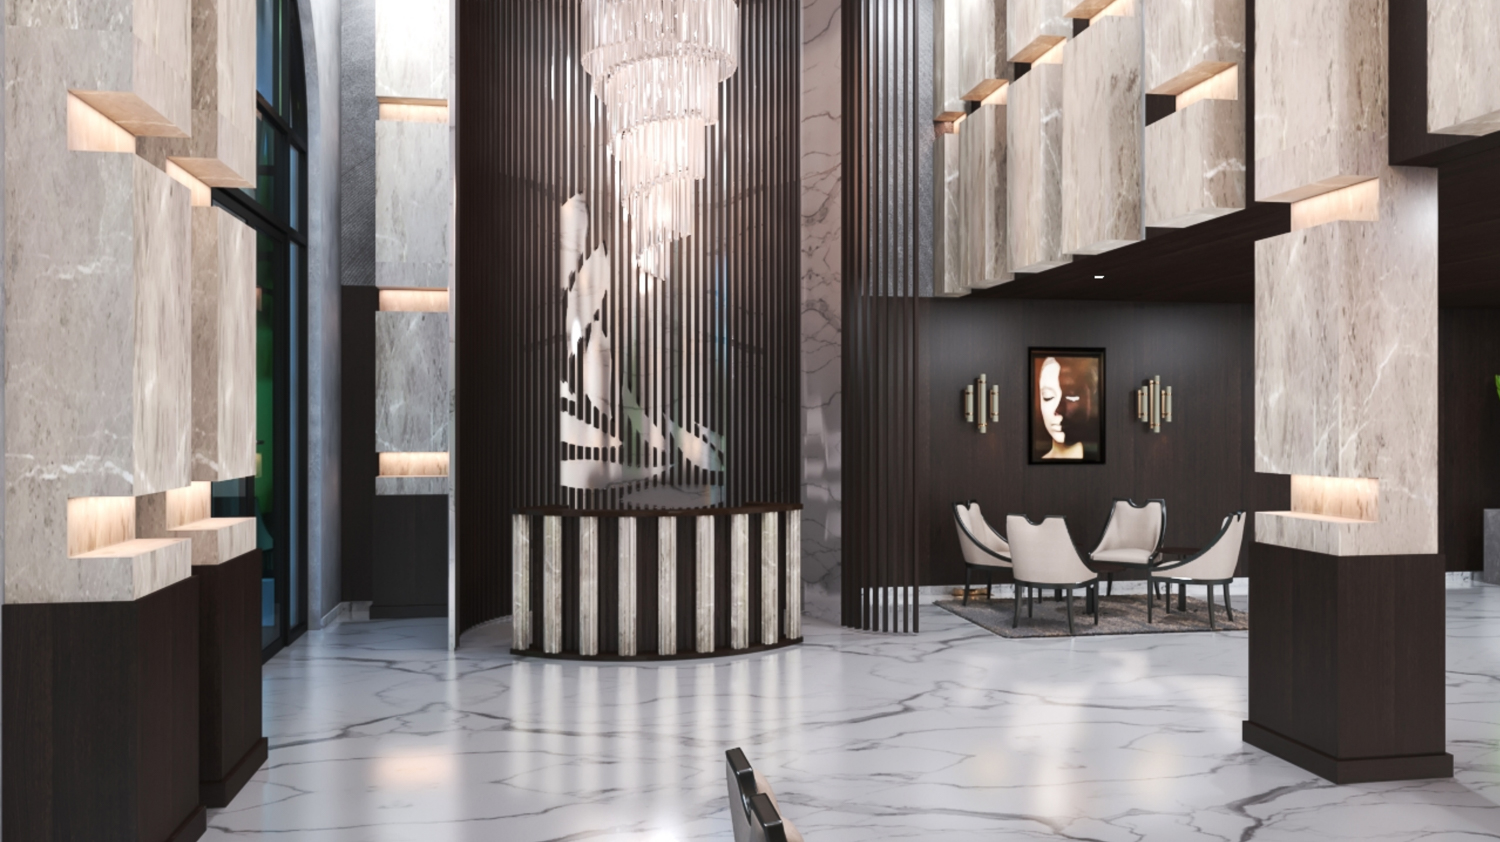 615 Stockton Avenue lobby, illustration from Infinite Investment Realty